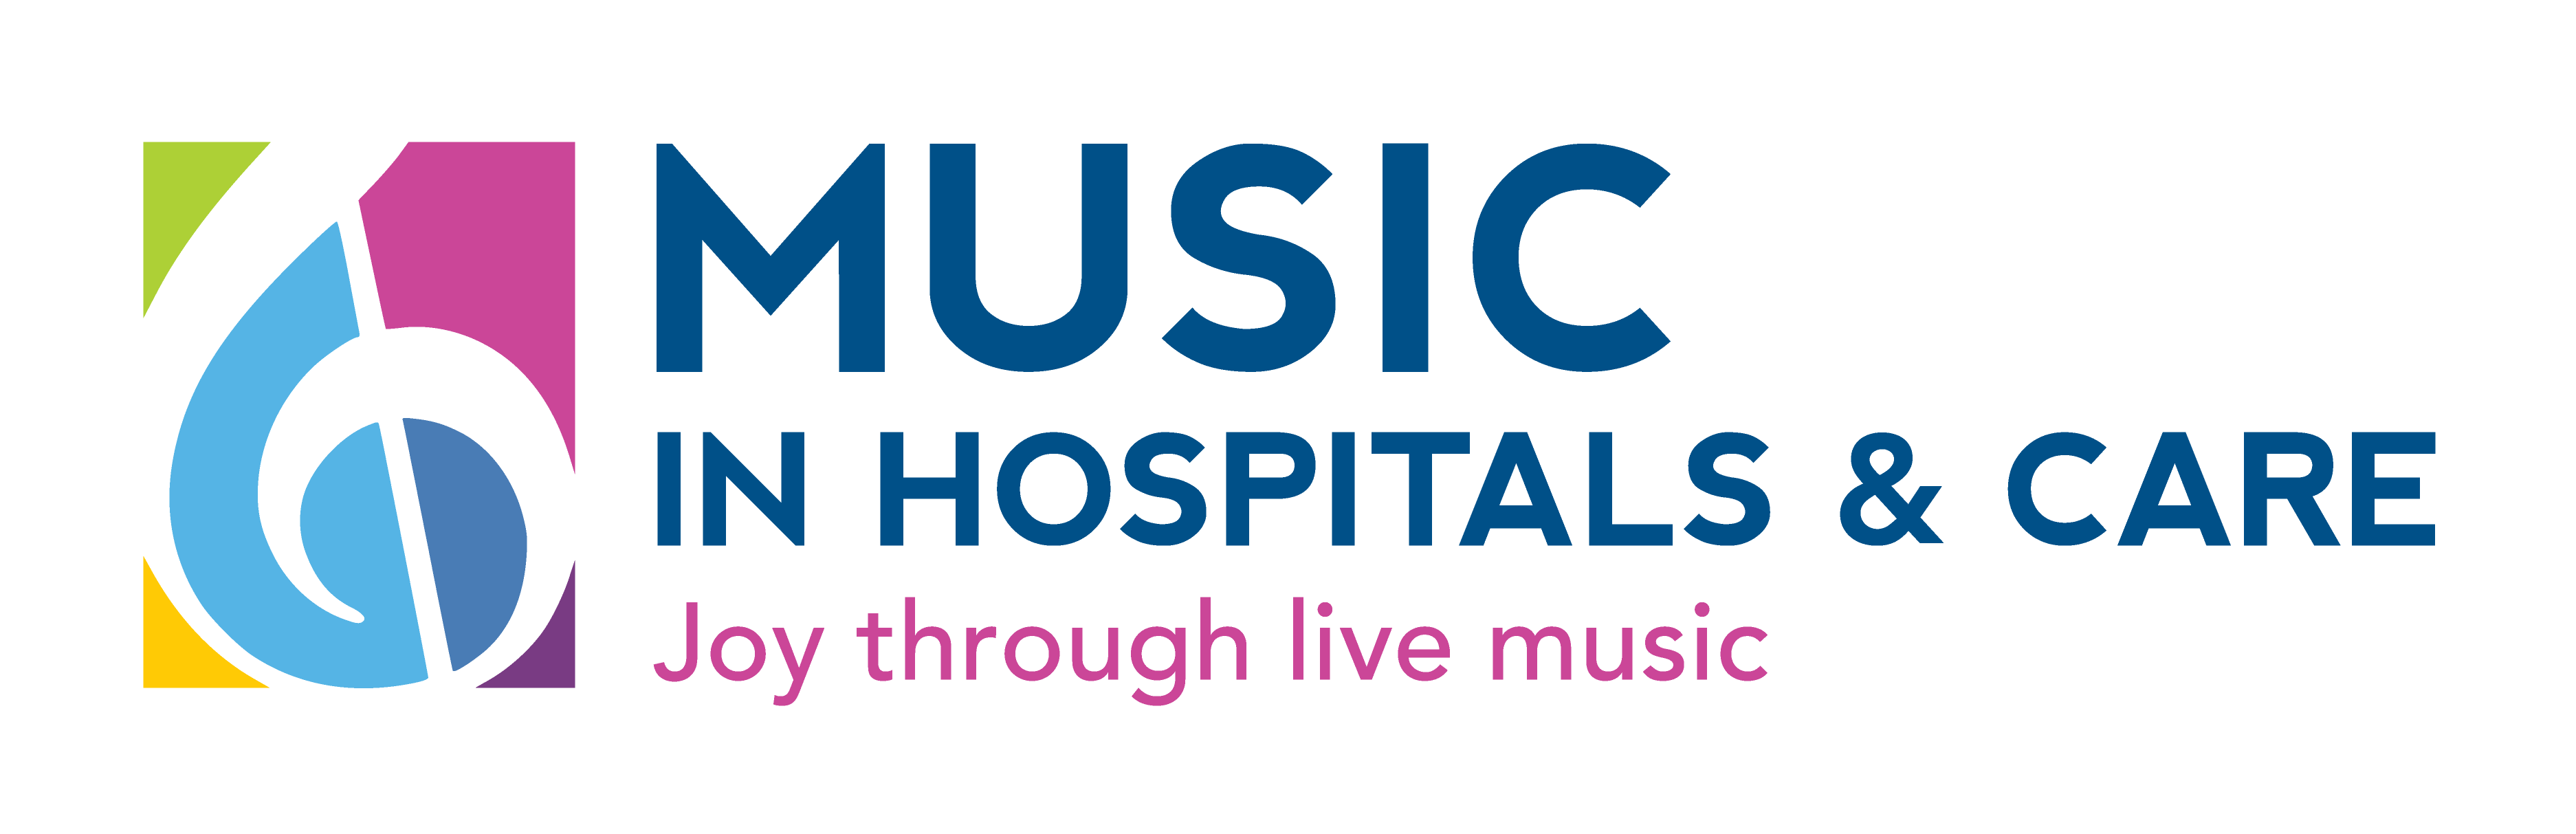 Music in Hospitals & Care